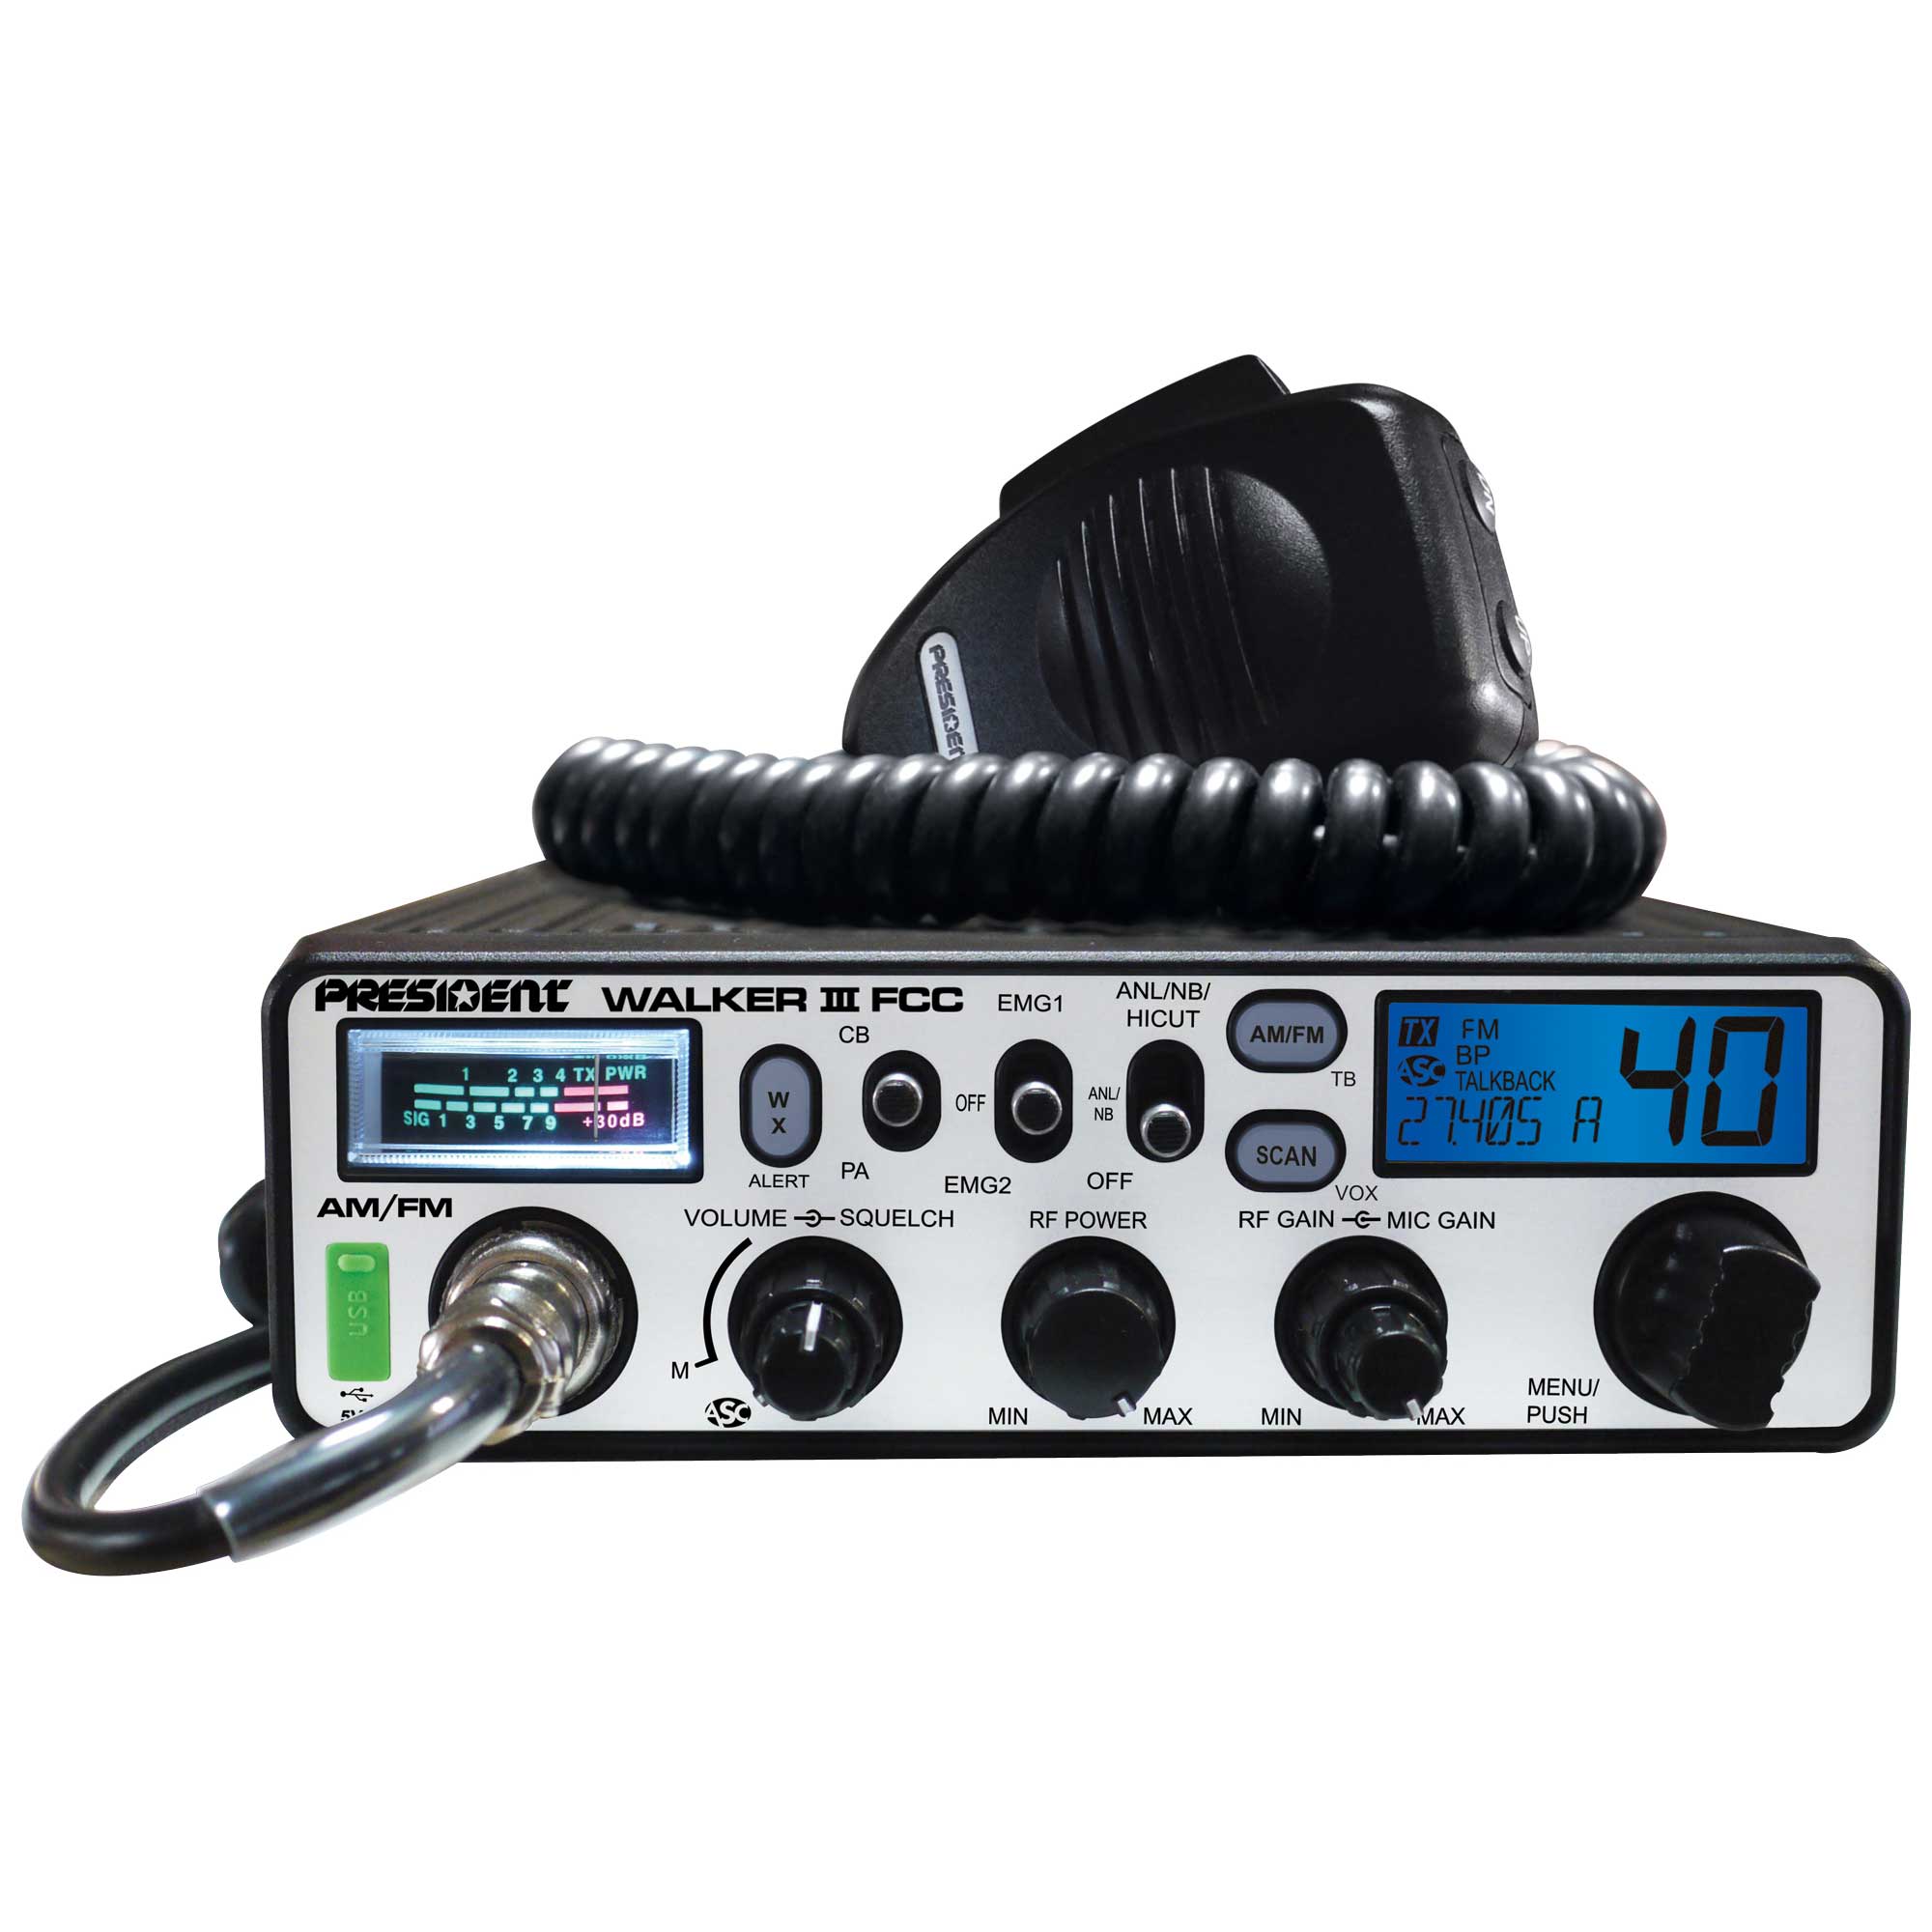 PRESIDENT - WALKER III FCC 40 CHANNEL AM/FM DIN SIZE CB RADIO WITH WEATHER, VOX, 7 BACK LIGHT COLORS